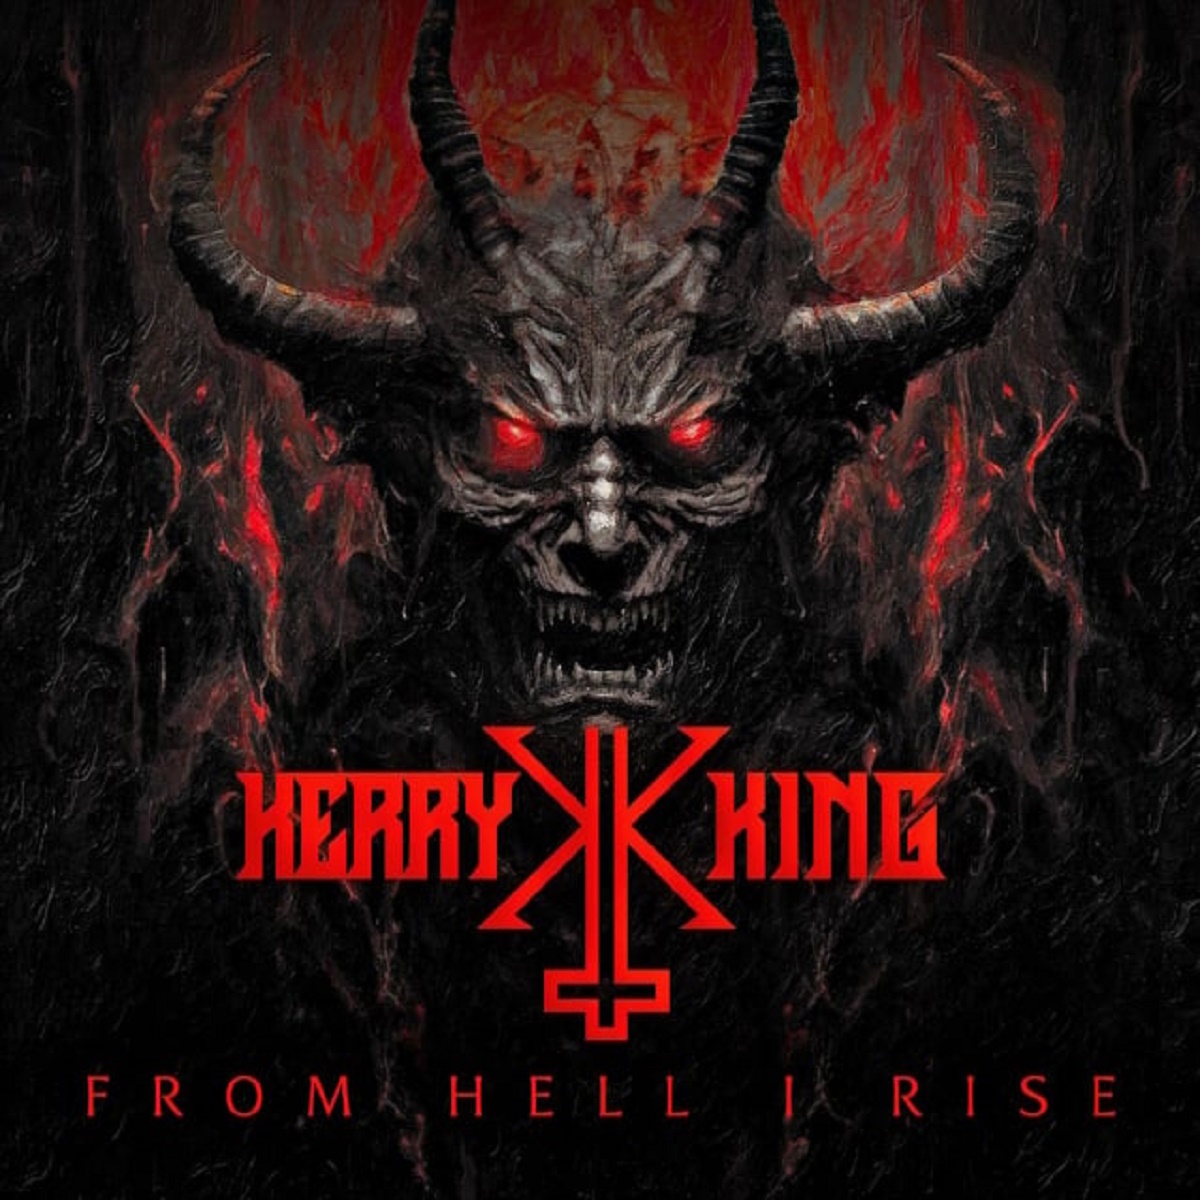 Kerry King From hell I rise